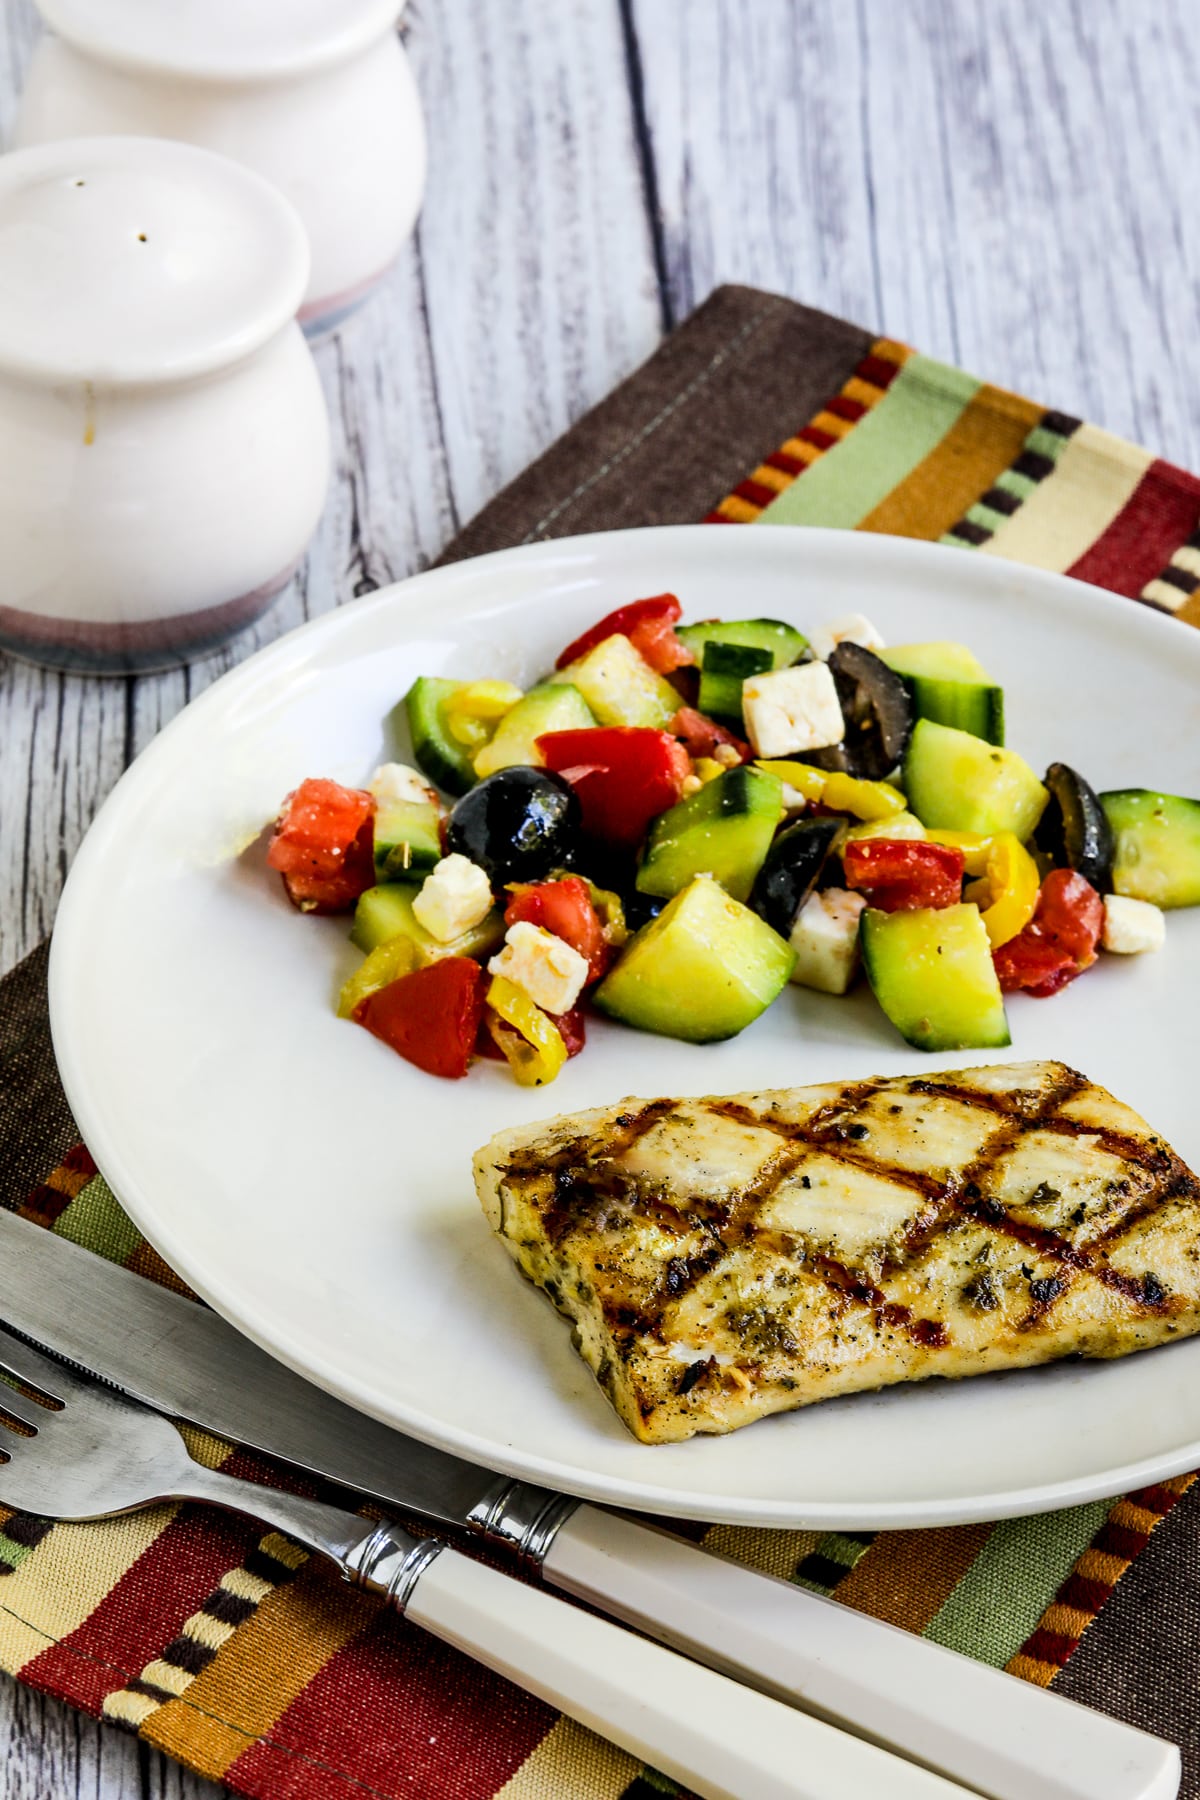 Grilled Fish with Lemon and Capers shown on serving plate with salad.